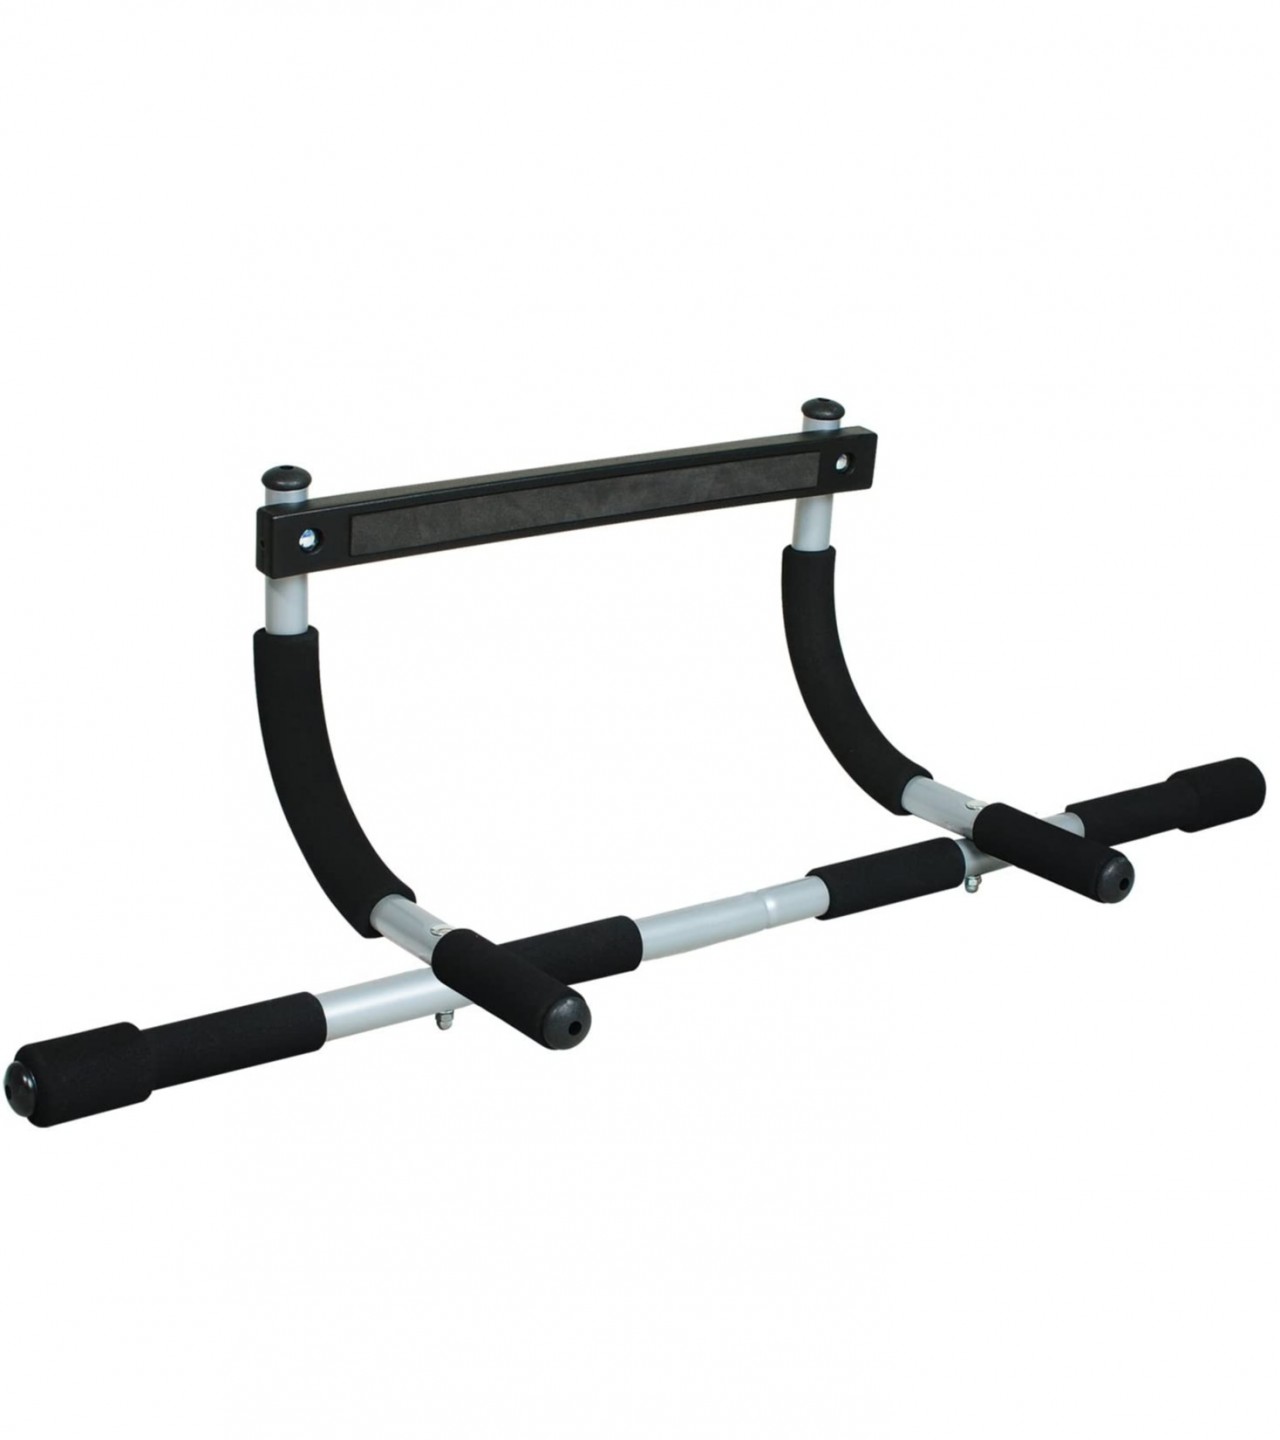 Iron Gym Bar Total Upper Body Workout Bar for Gym/Office/Home